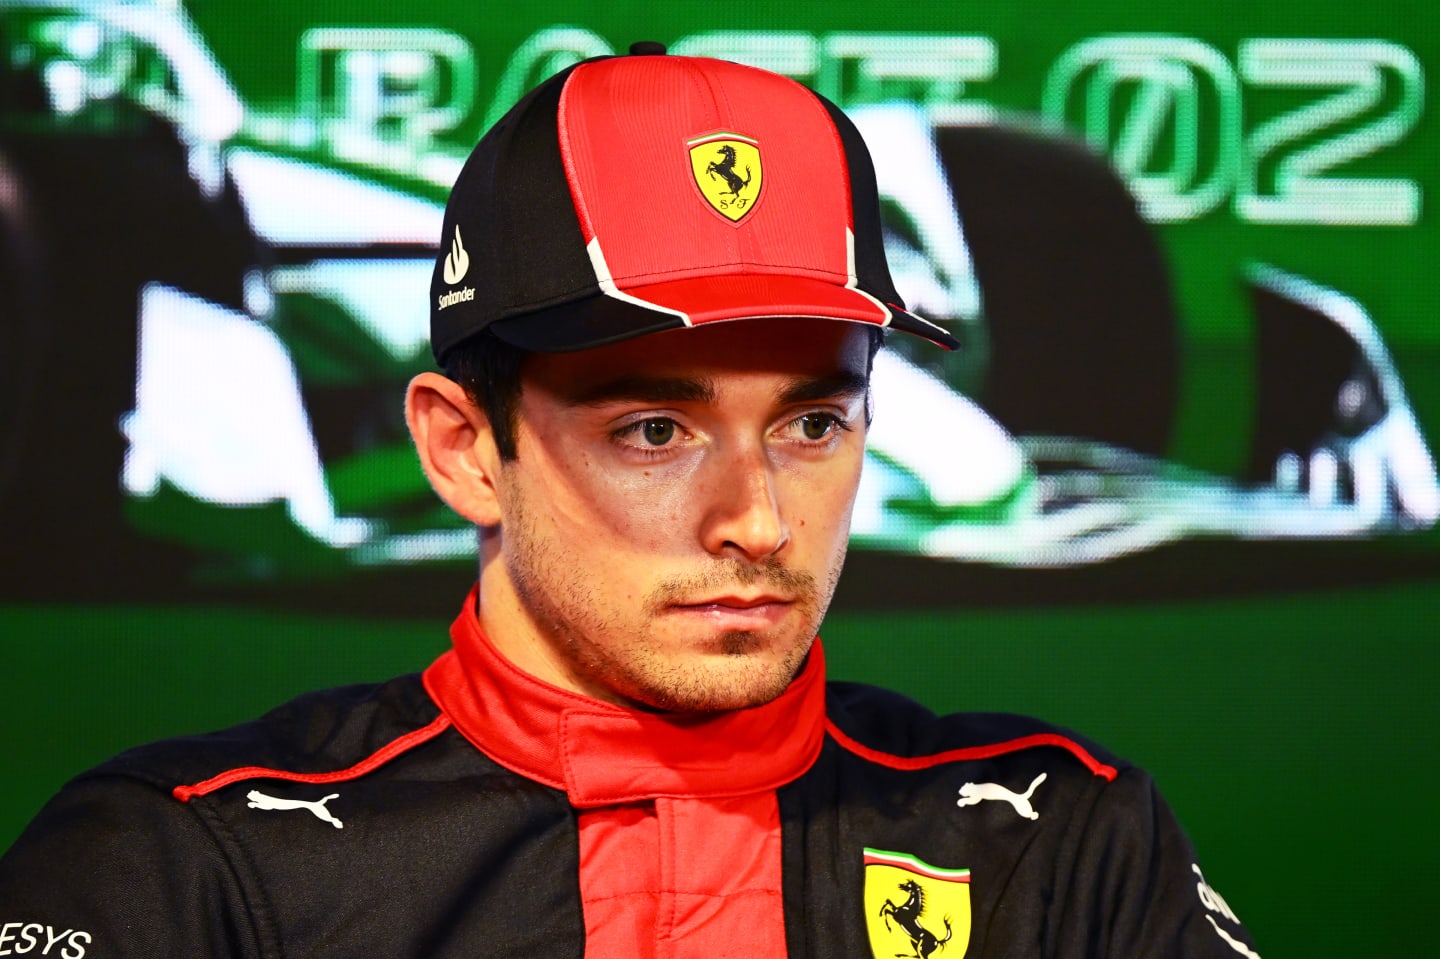 JEDDAH, SAUDI ARABIA - MARCH 18: Second placed qualifier Charles Leclerc of Monaco and Ferrari attends the press conference after qualifying ahead of the F1 Grand Prix of Saudi Arabia at Jeddah Corniche Circuit on March 18, 2023 in Jeddah, Saudi Arabia. (Photo by Clive Mason/Getty Images)